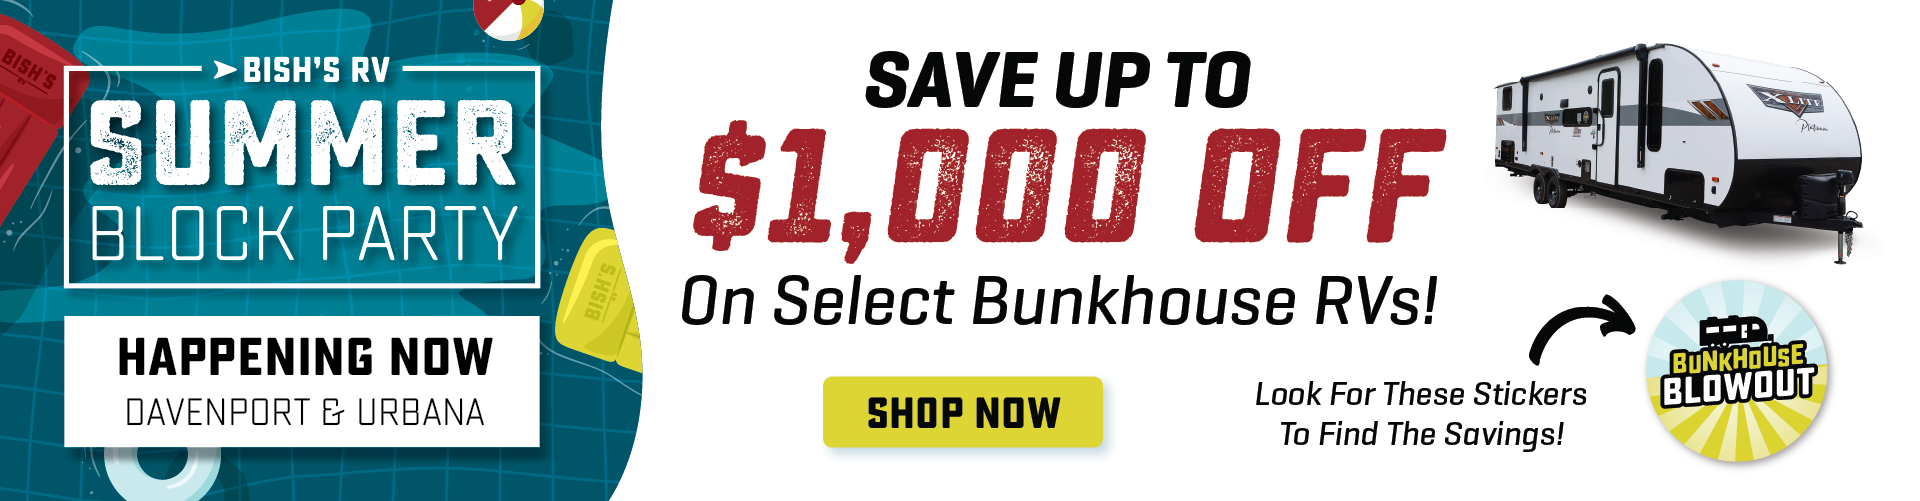 Save Up To $1,000 Off On Select Bunkhouse RVs - Happening Now - Bish's RV - Davenport and Center Point-Urbana